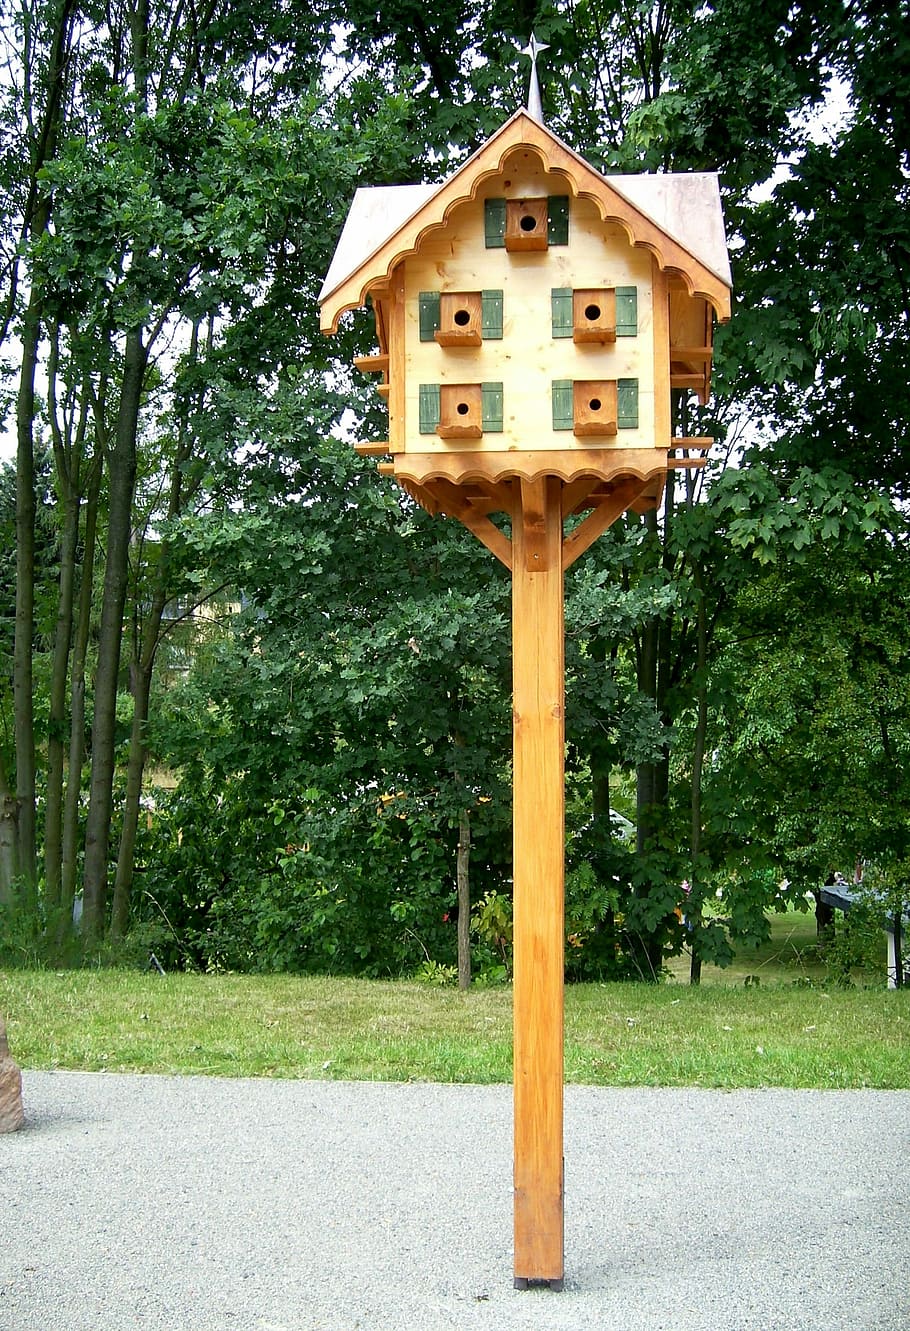 Vacation, Insect, House, insect house, useful animals, garden, agriculture, hotbed, tree, wood - material